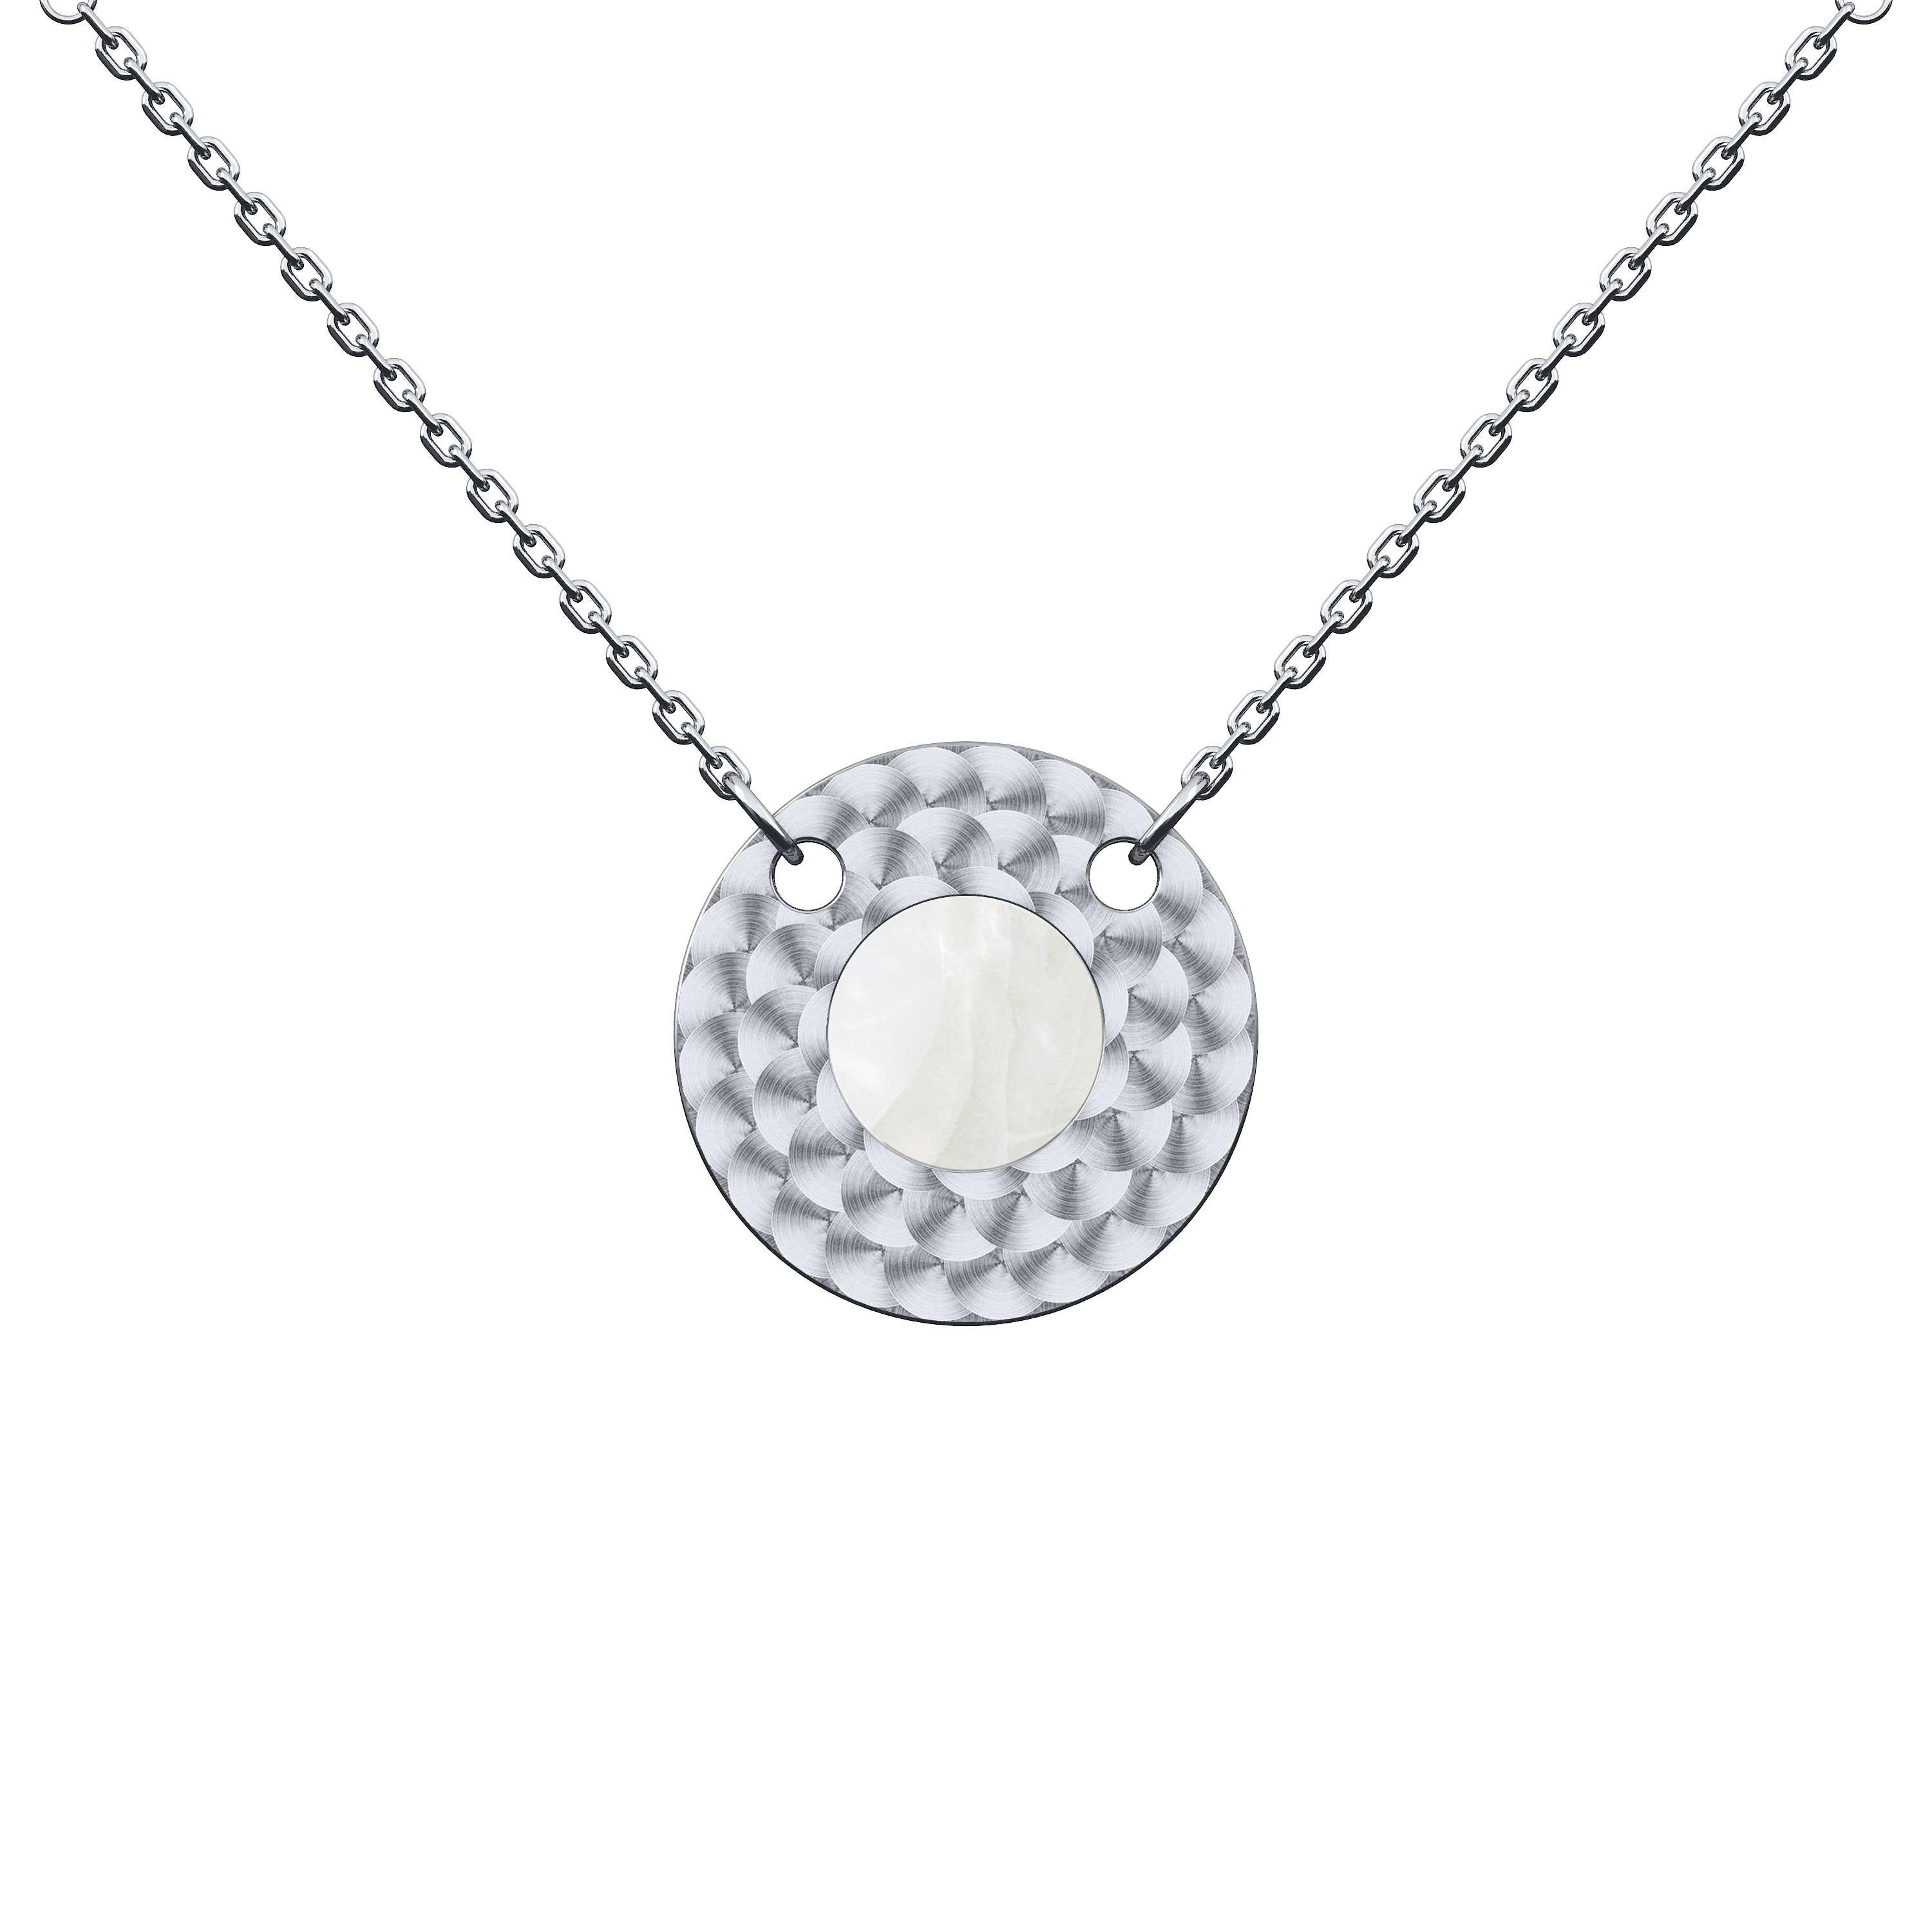 B.R.M Dolce Vita Twice (2 in 1) 18 carats gray gold reversible necklace is an exquisite work of art. It can be worn in two ways. It comes with Reconstituted Turquoise stone on one side, and adorned with mother of pearl, a symbol of serenity on the